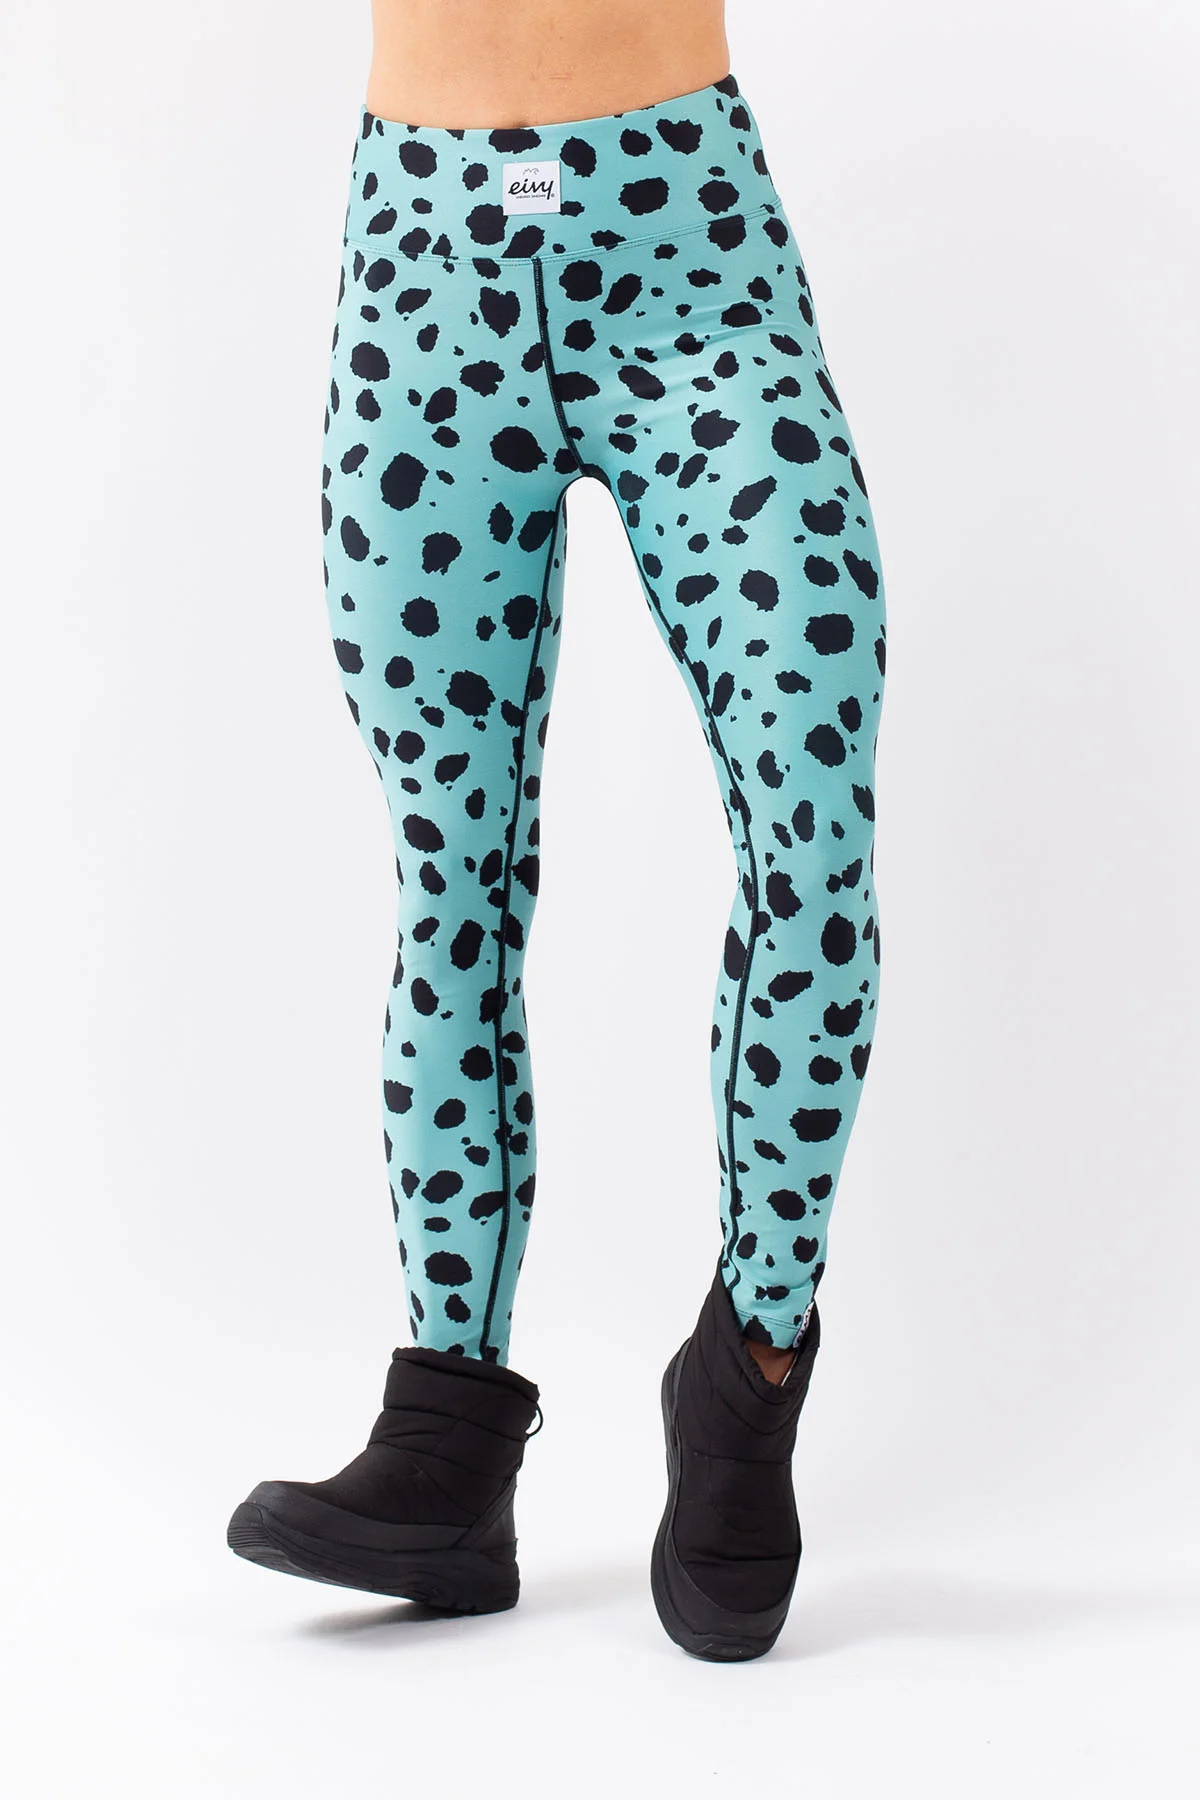 Icecold Tights - Turquoise Cheetah | S